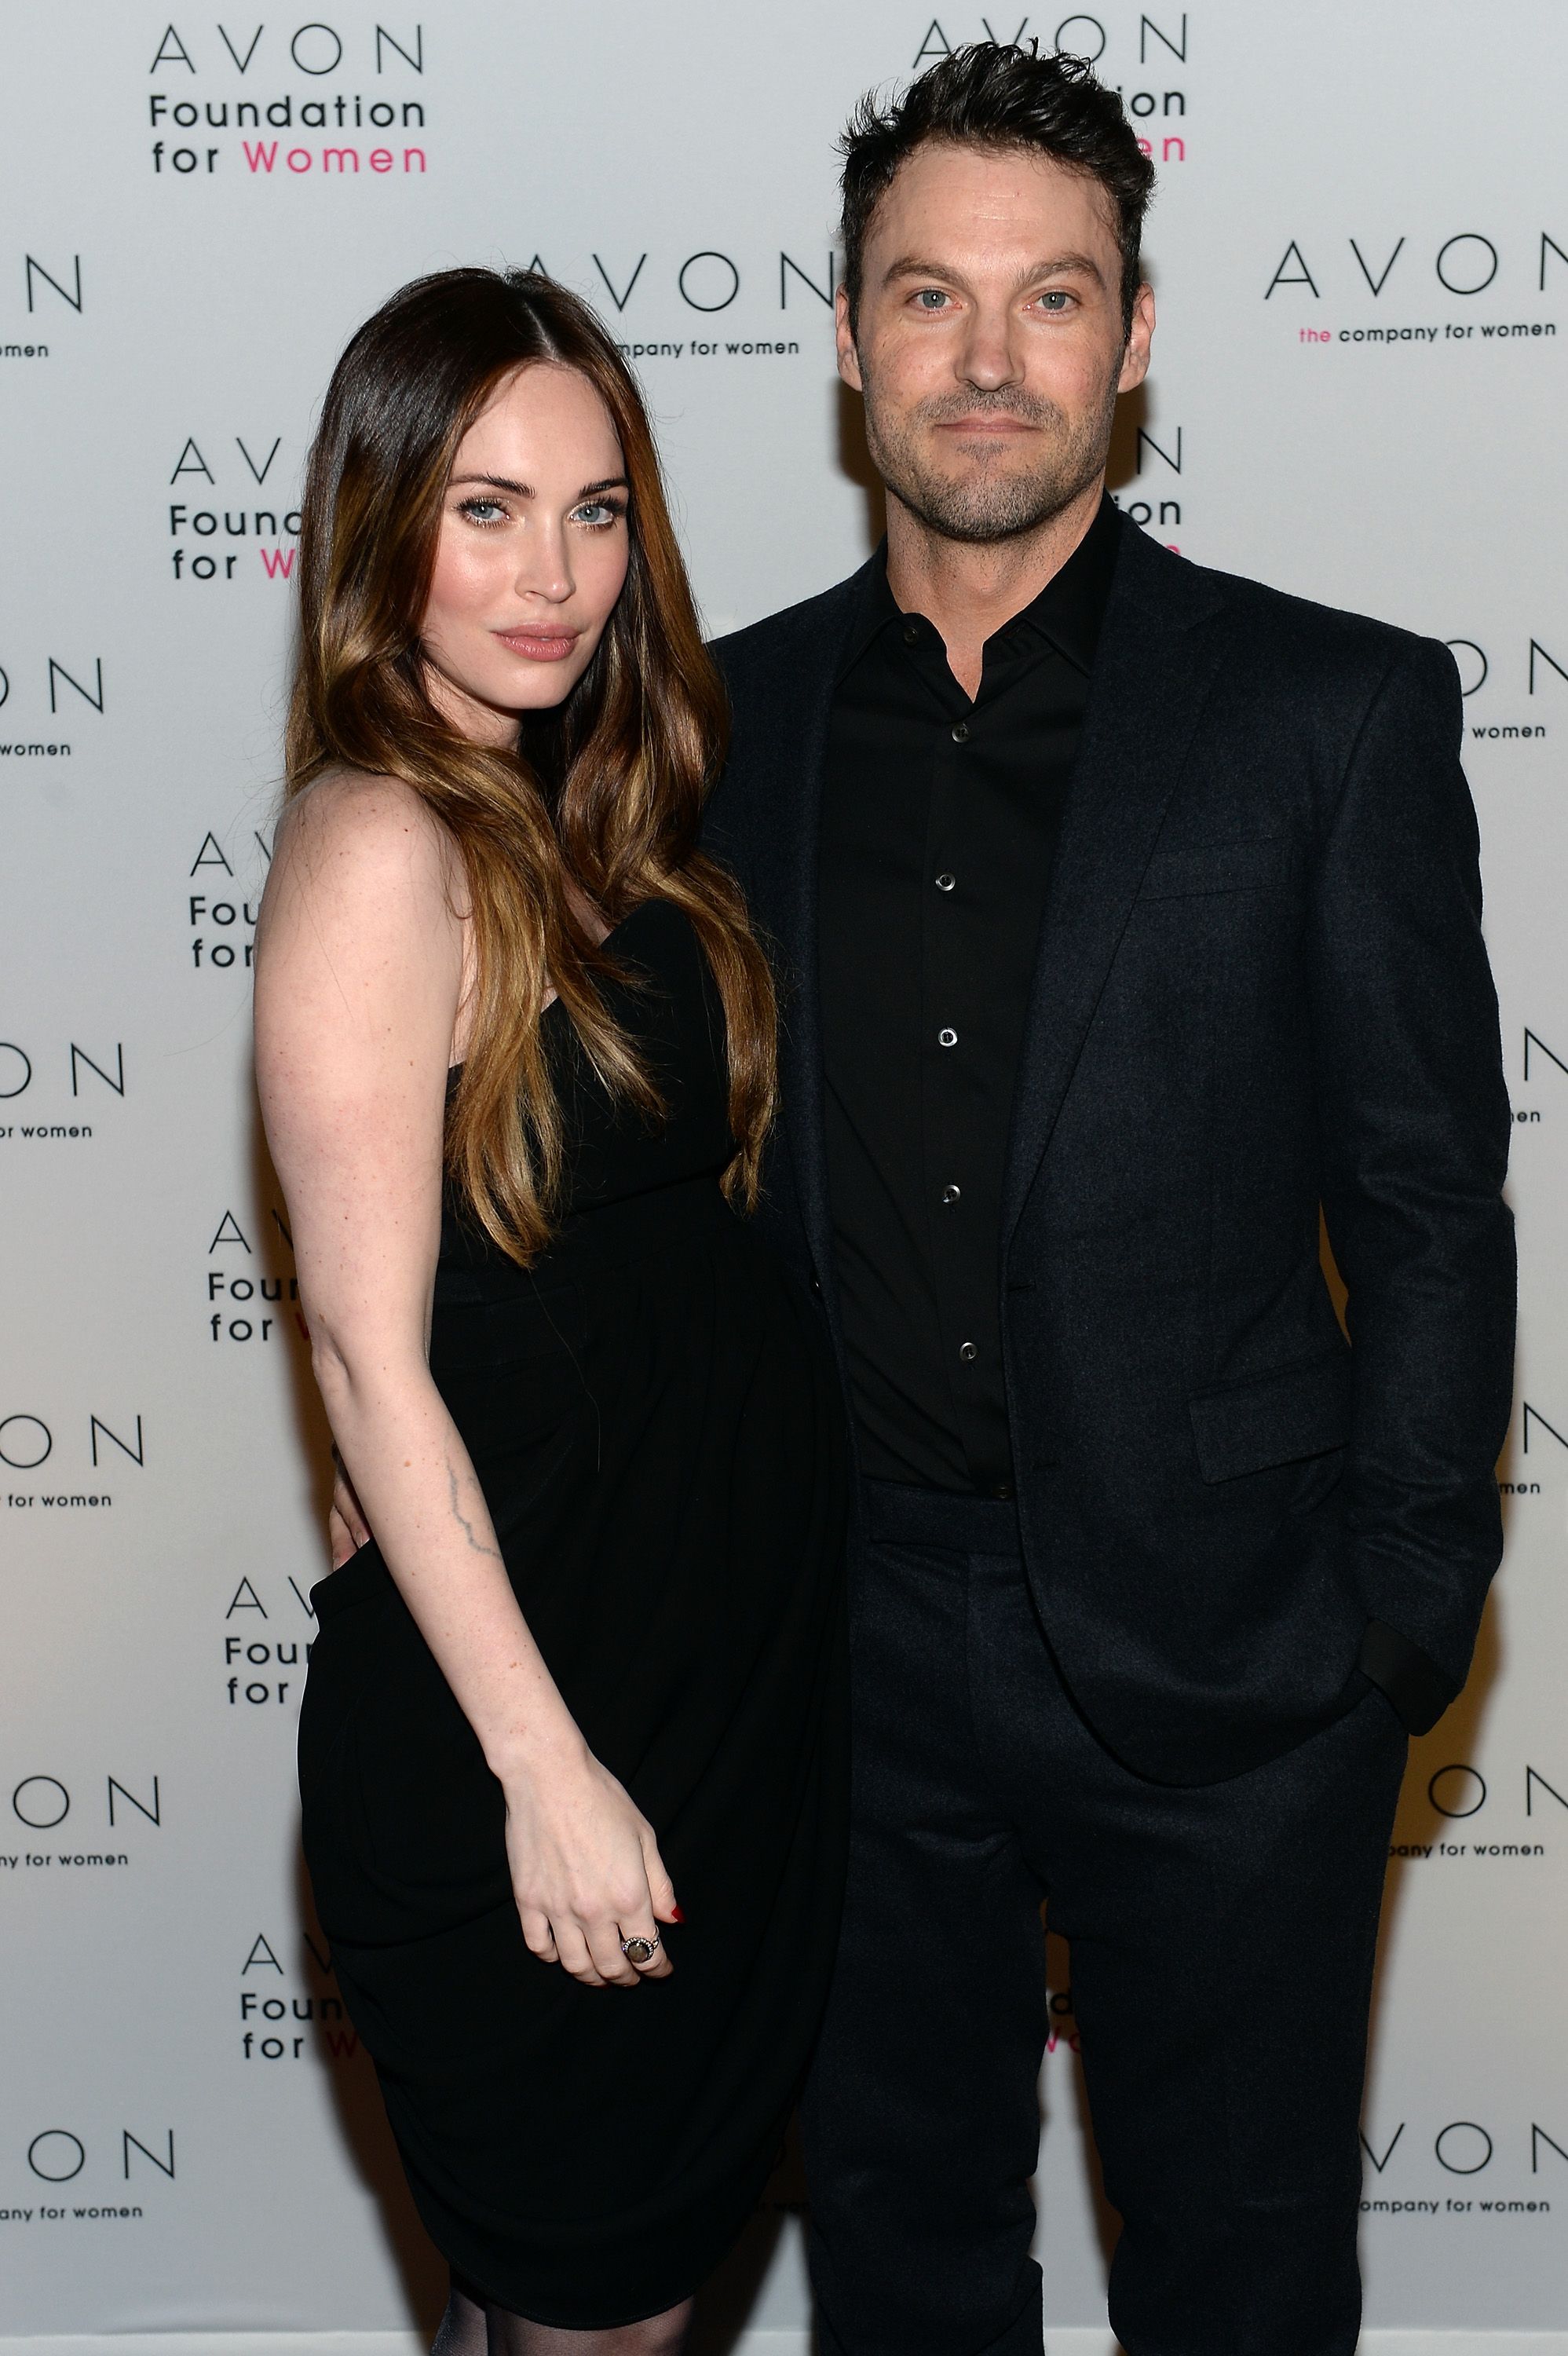 Megan Fox and Brian Austin Green at The Morgan Library & Museum on November 21, 2013 | Photo: Getty Images